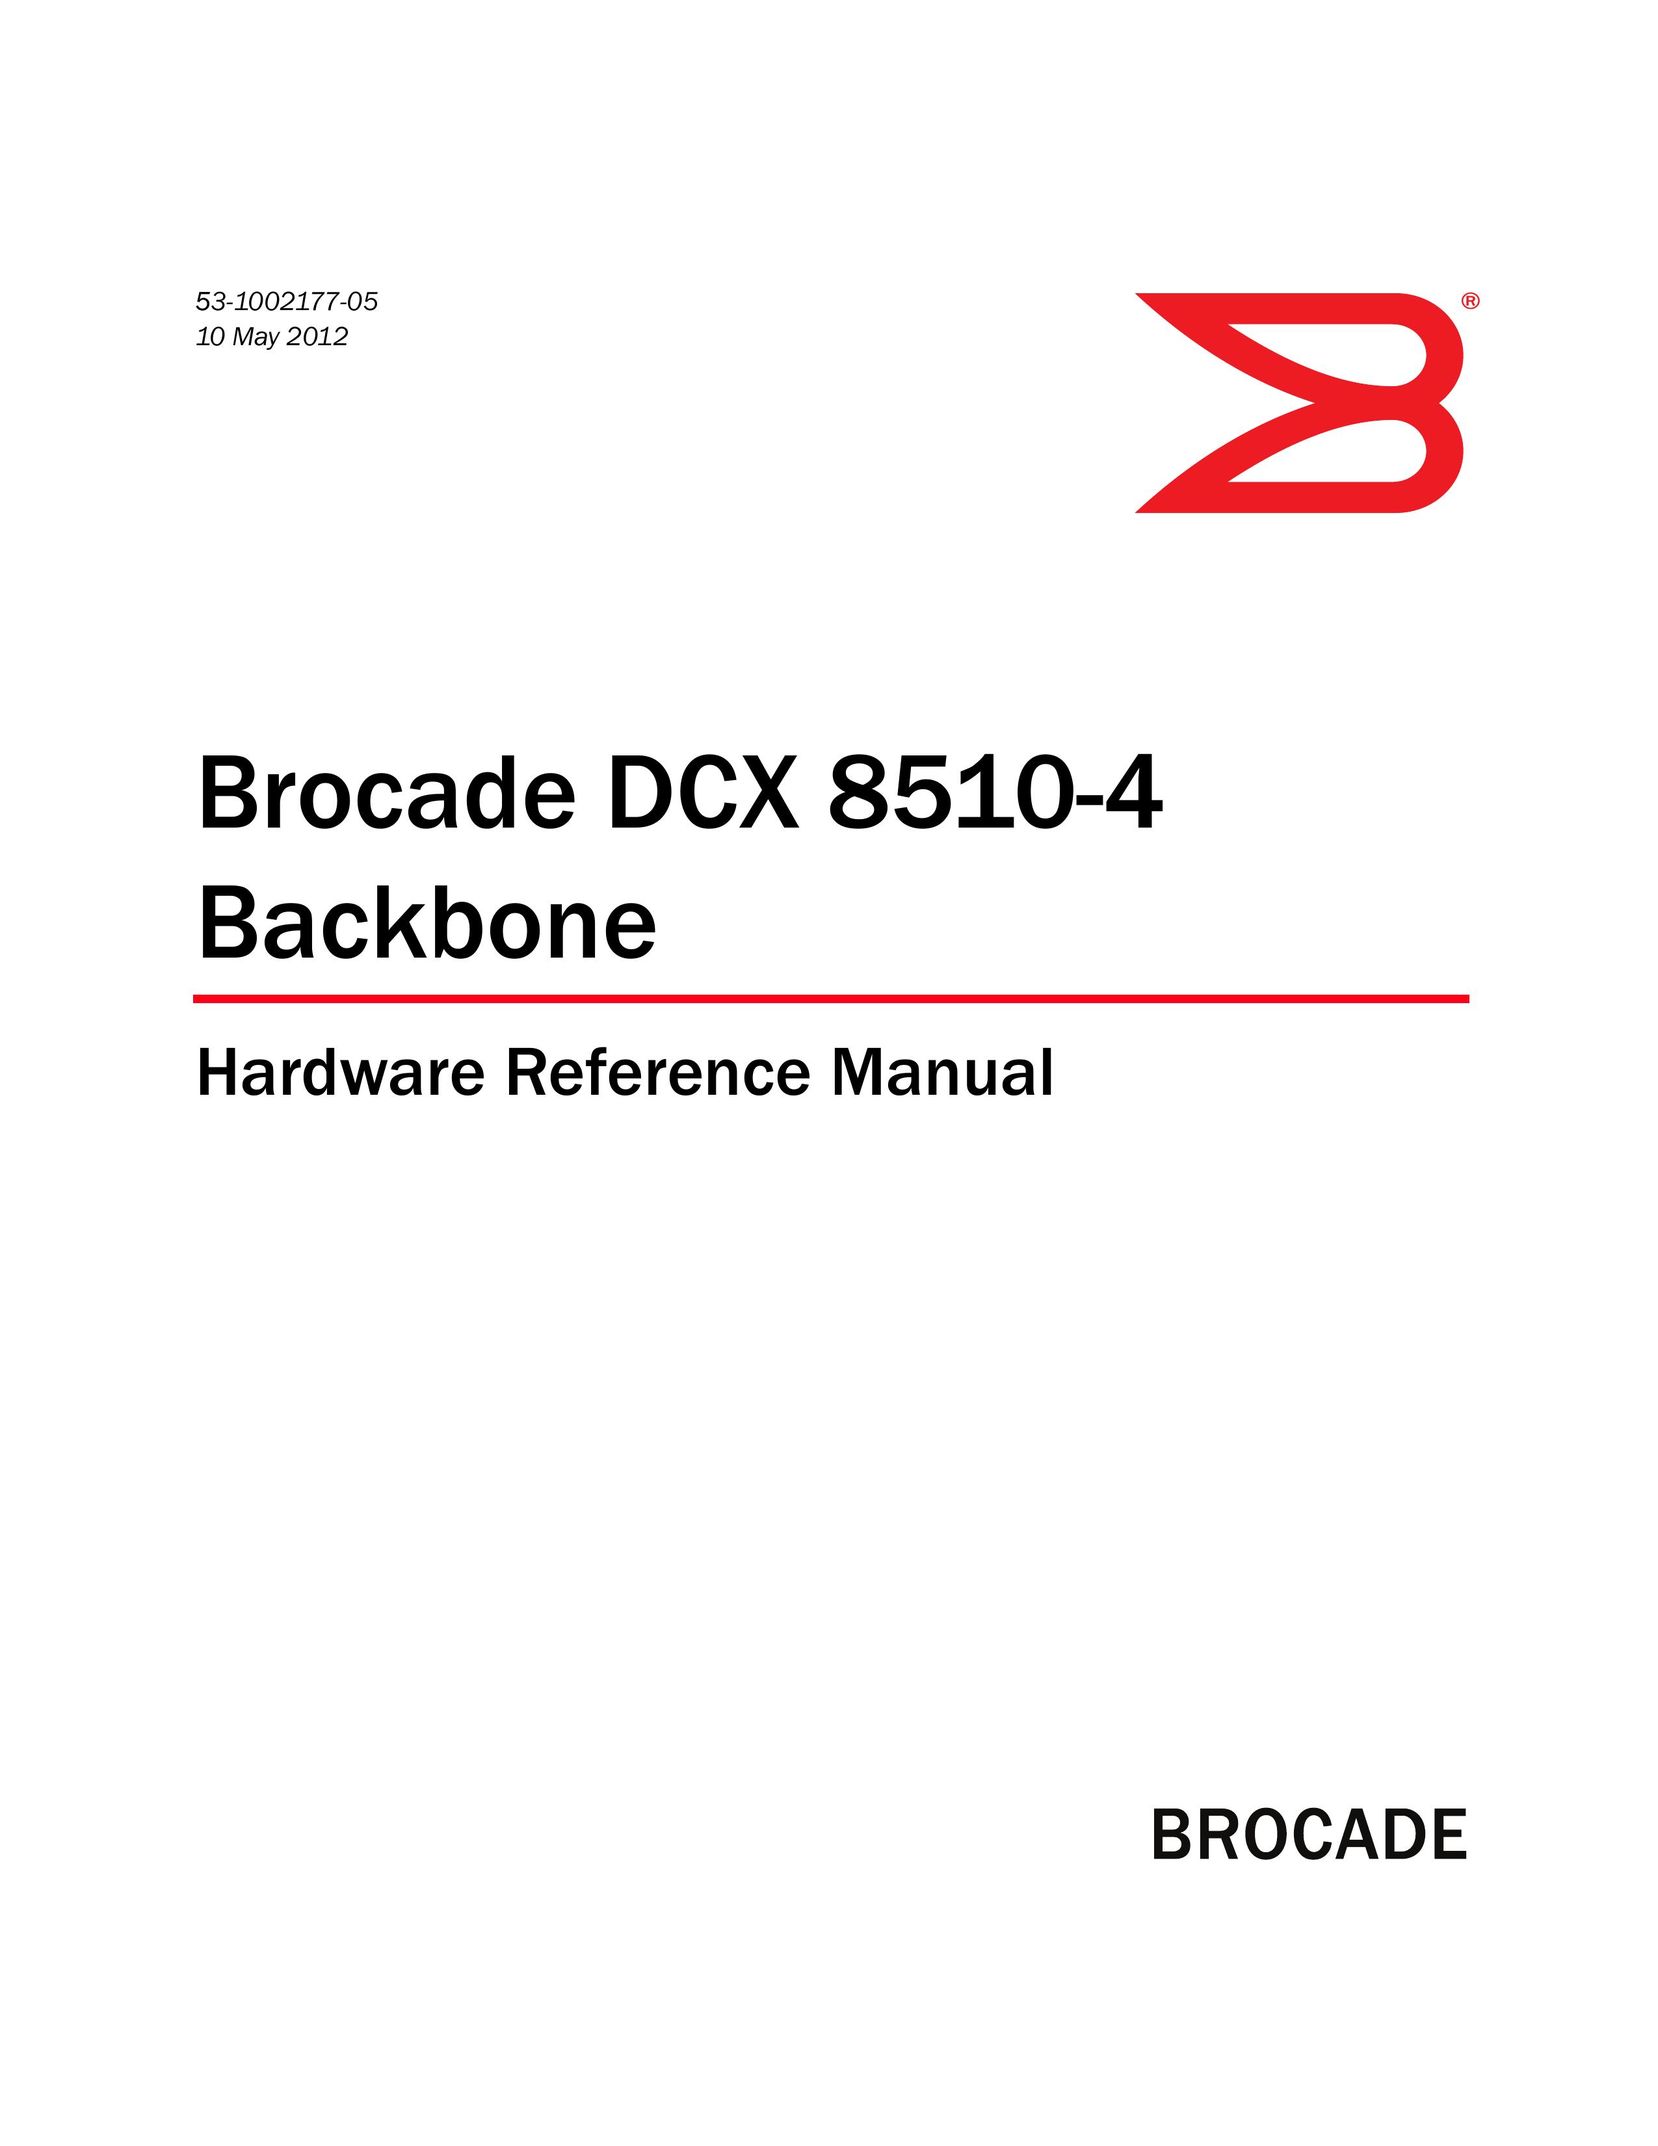 Brocade Communications Systems DCX 8510-4 Computer Hardware User Manual